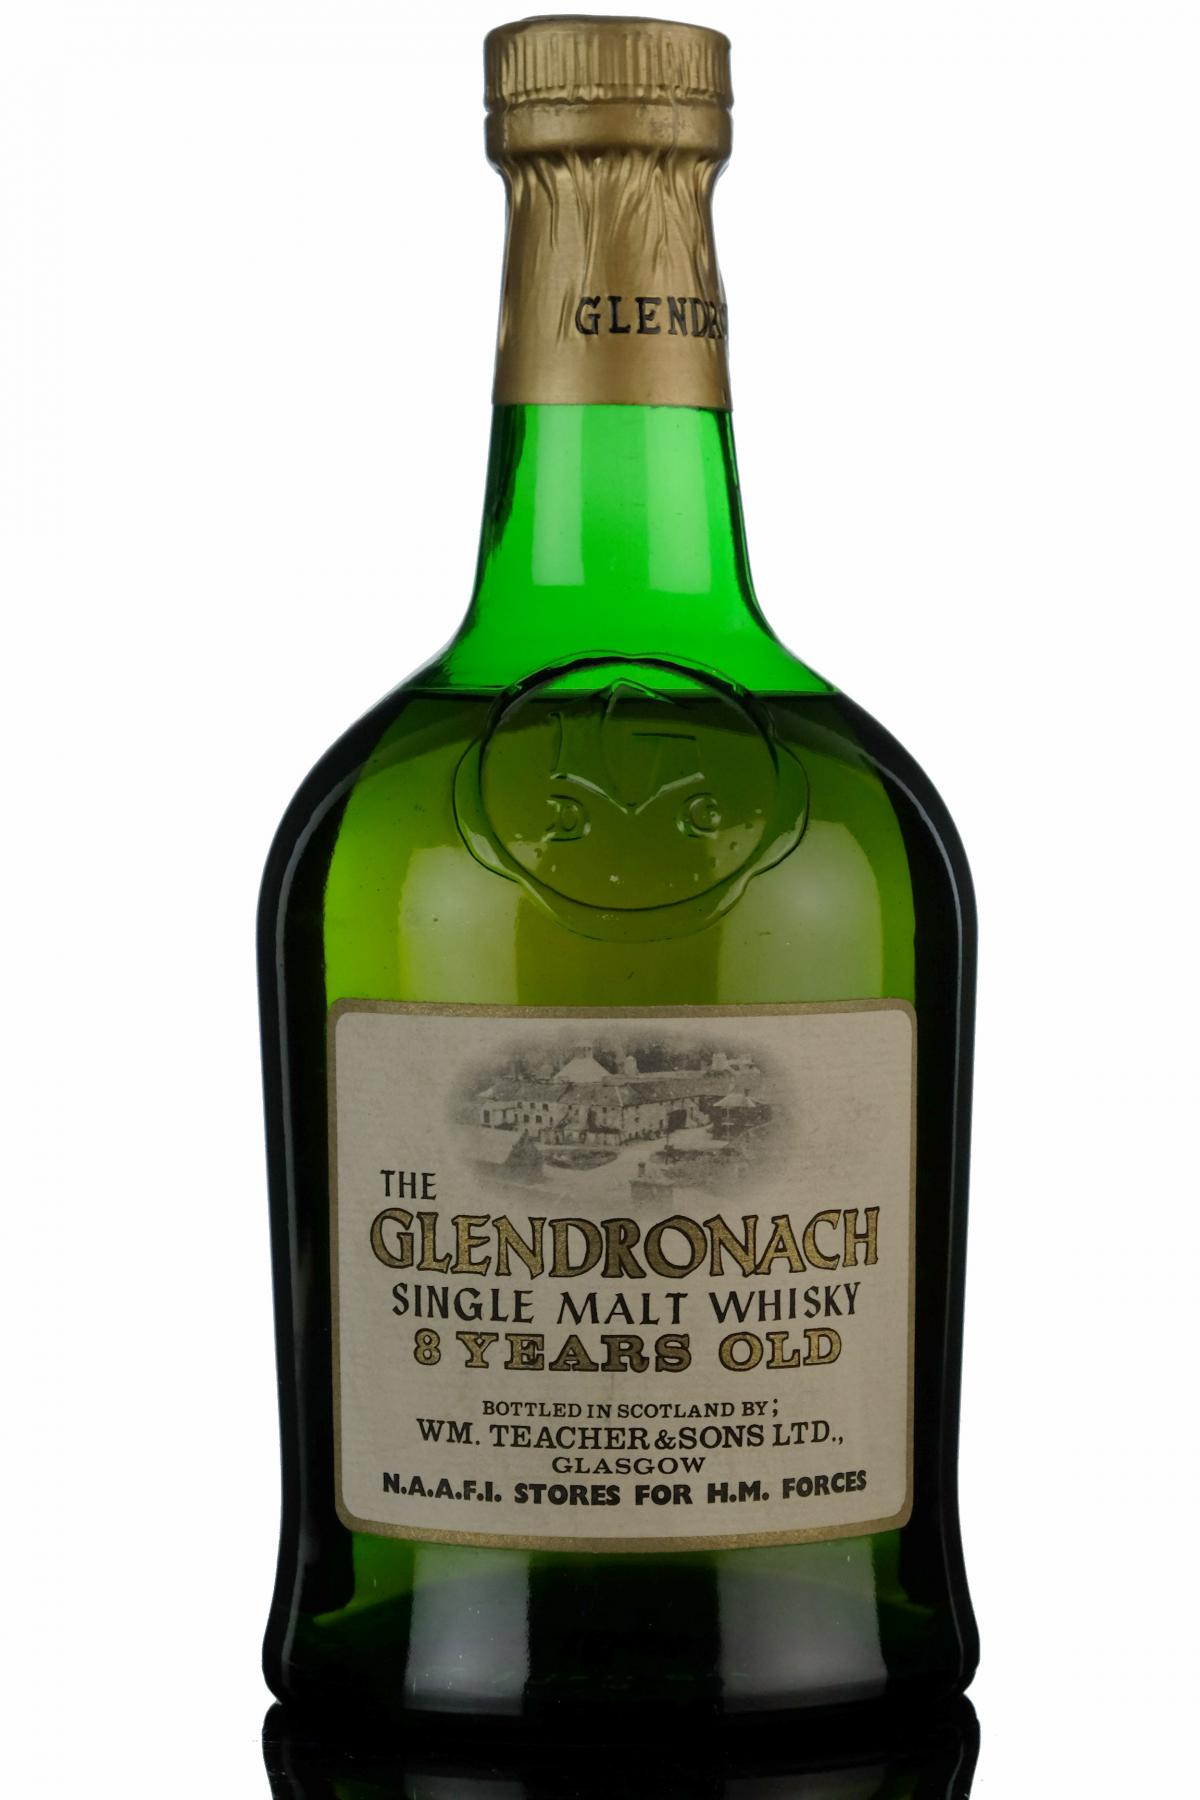 Glendronach 8 Year Old - NAAFI Store For H.M Forces - Mid 1970s